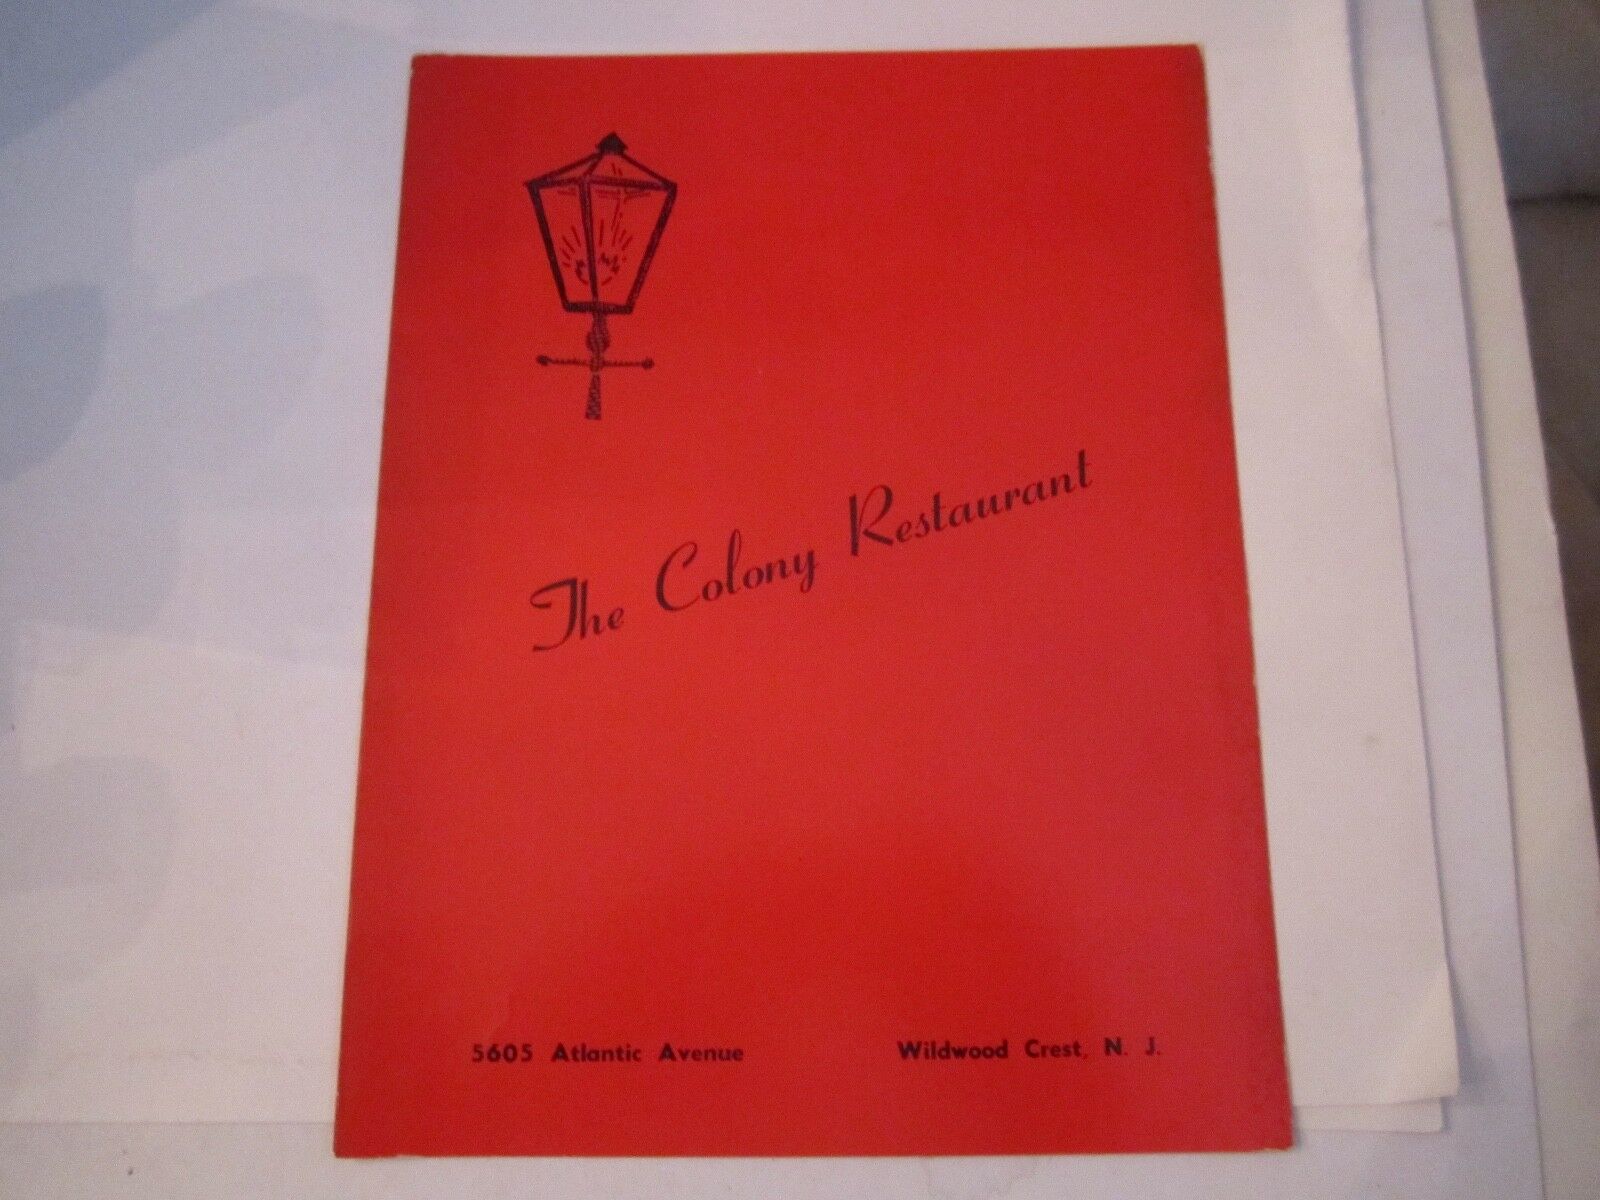 THE COLONY RESTAURANT MENU - VINTAGE - COLLECTIBLE - TUB RY-1